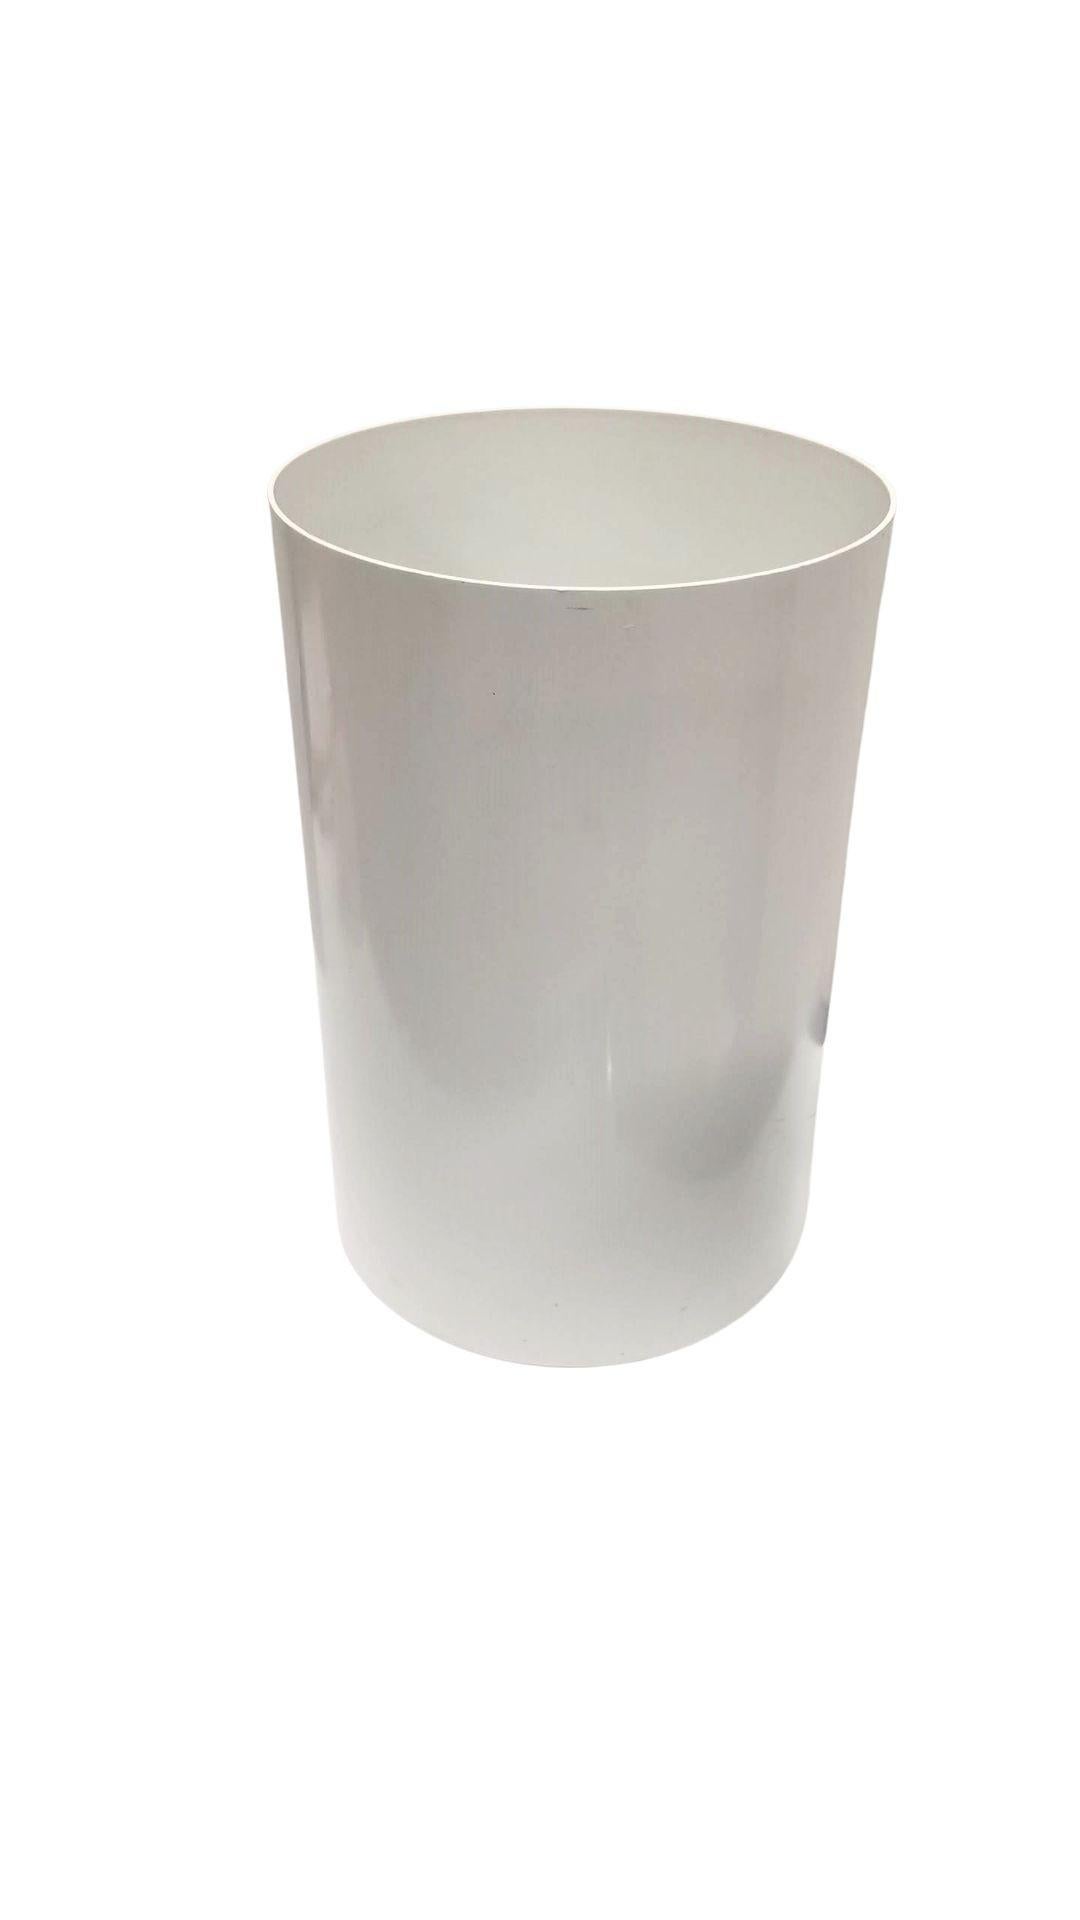 Set of 2 white plastic waste bins by Kartell
Kartell is an Italian company founded in Milan in 1949 by Giulio Castelli. Their vintage waste bins are stylish and functional, featuring a sleek design made from high-quality plastic, these waste bins